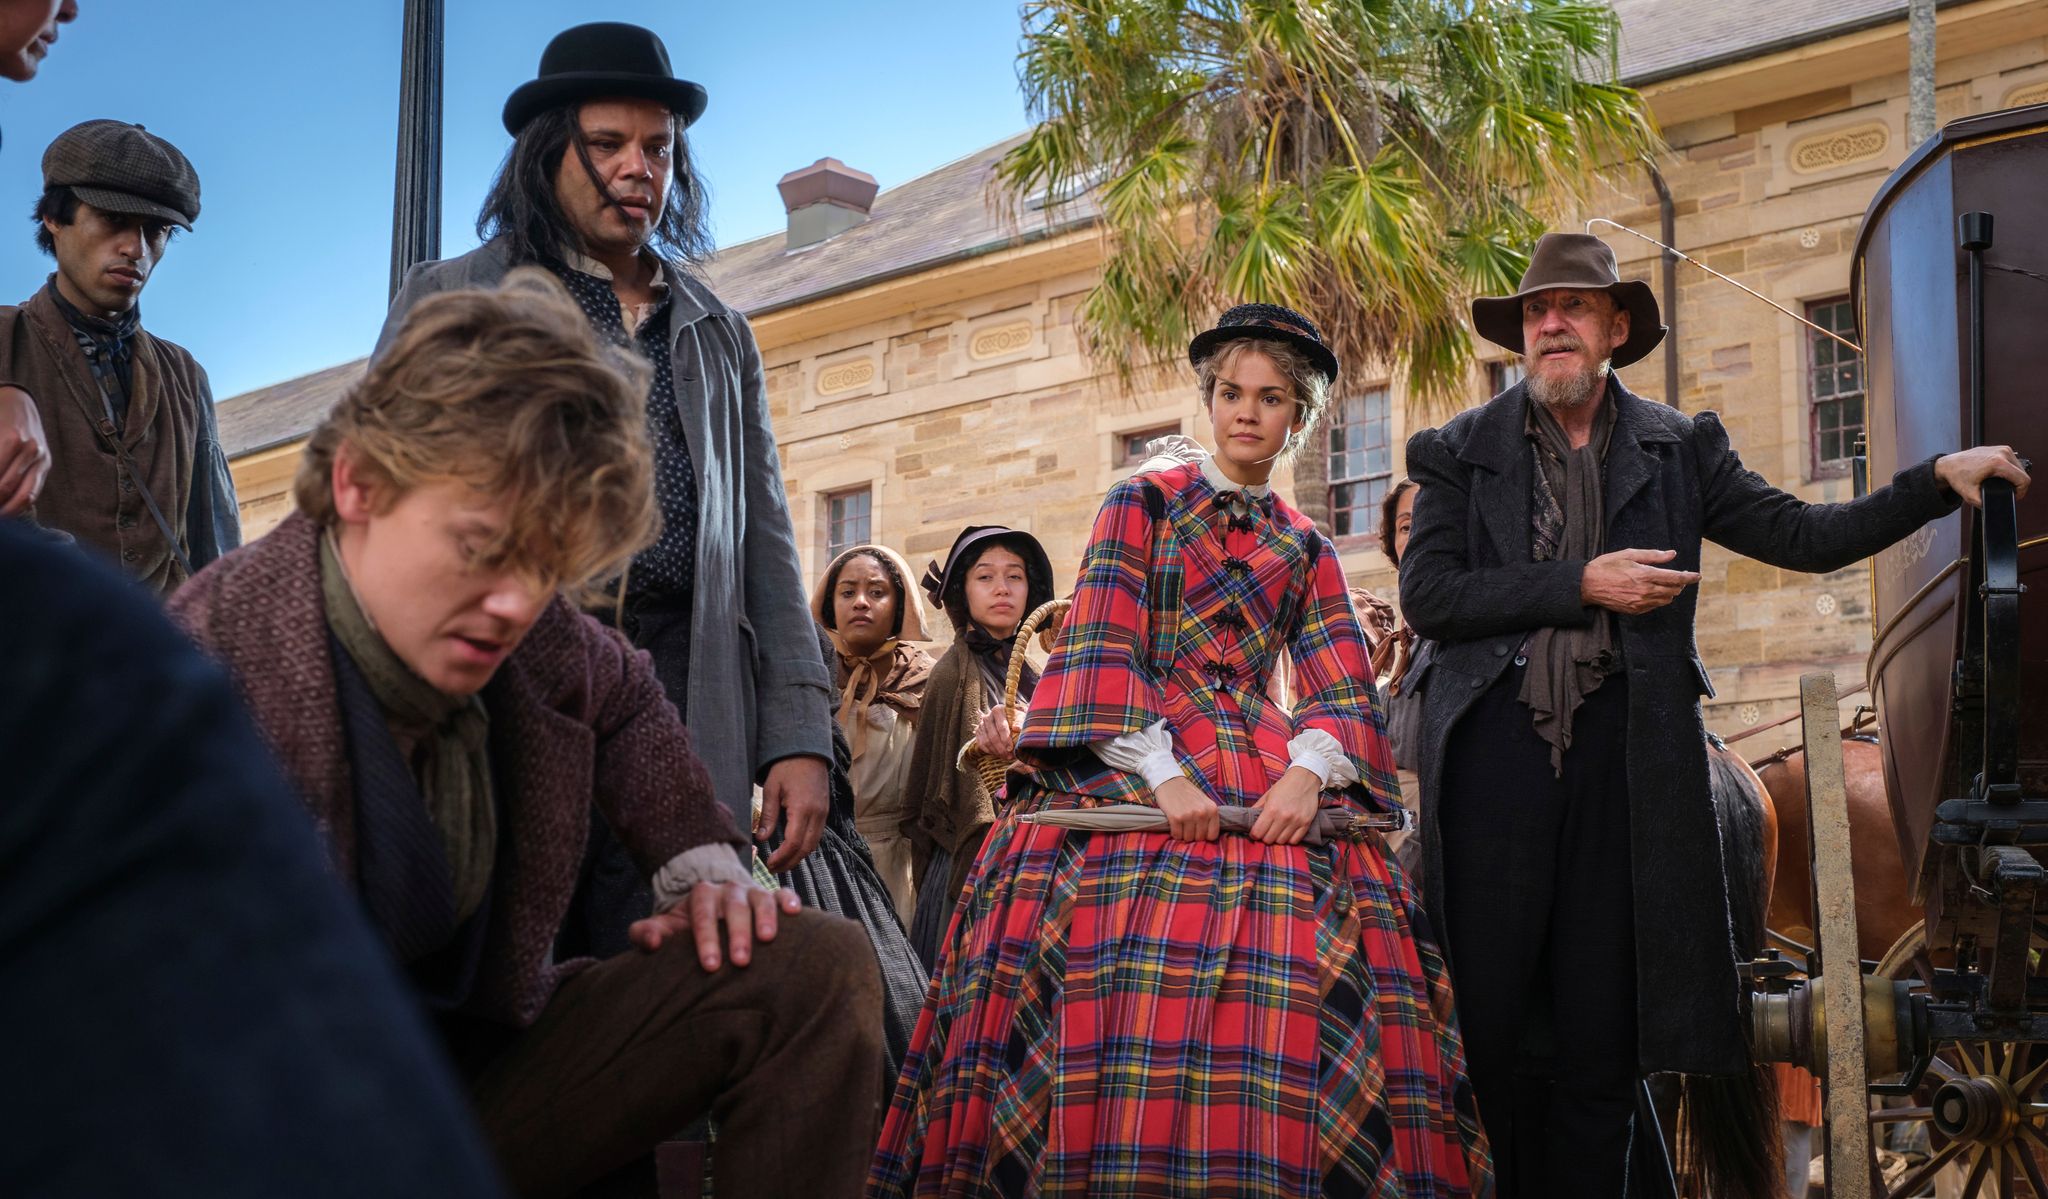 Crowd of people stand outside investigating the ground. Including Jack Dawkins (Thomas Brodie-Sangster), Fagin (David Thewlis), and Lady Belle Fox (Maia Mitchell).